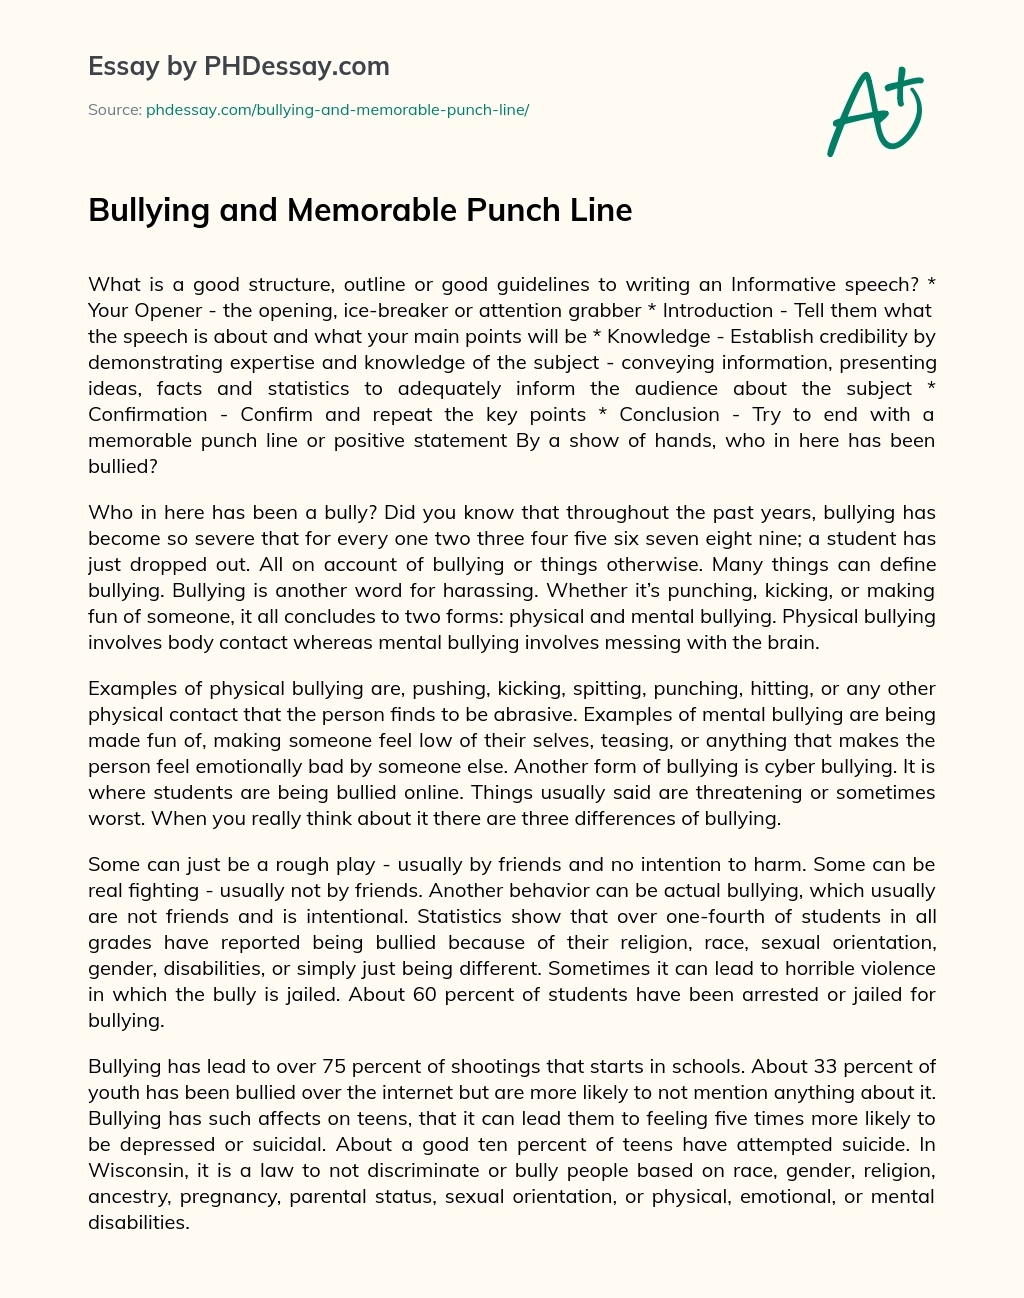 Bullying and Memorable Punch Line essay